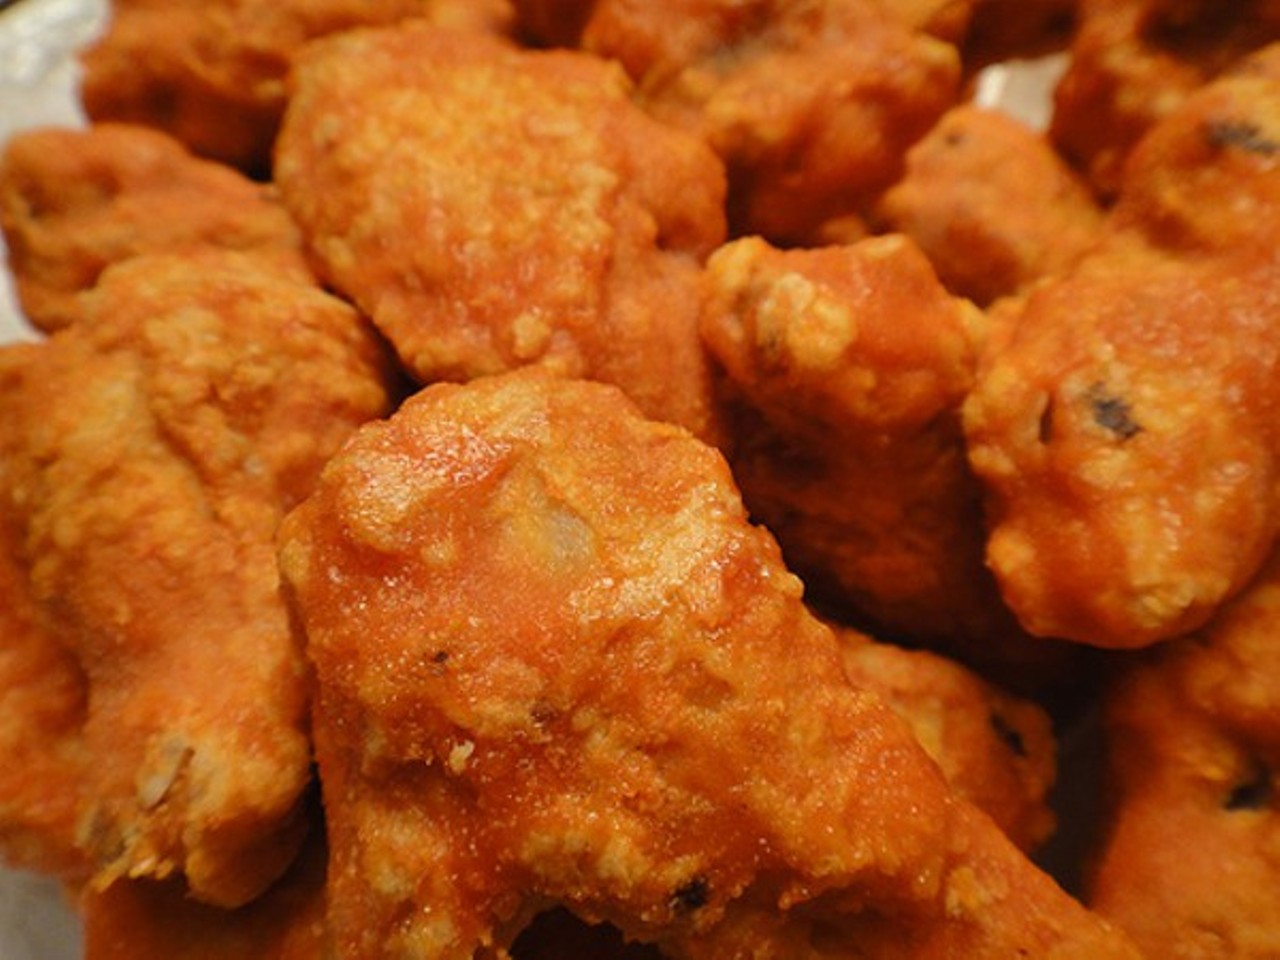 Dina's Pizza & Pub- 
Dina's Pizza & Pub's award winning wings are a staple in Old Brooklyn. They offer over 25 varities of sauces, but you can't go wrong with the hot Carribean- Just enough island spice. Dina's Pizza & Pub is located at 5701 Memphis Ave. Call 216-351-3663 for more information. (Photo via Flickr CC)